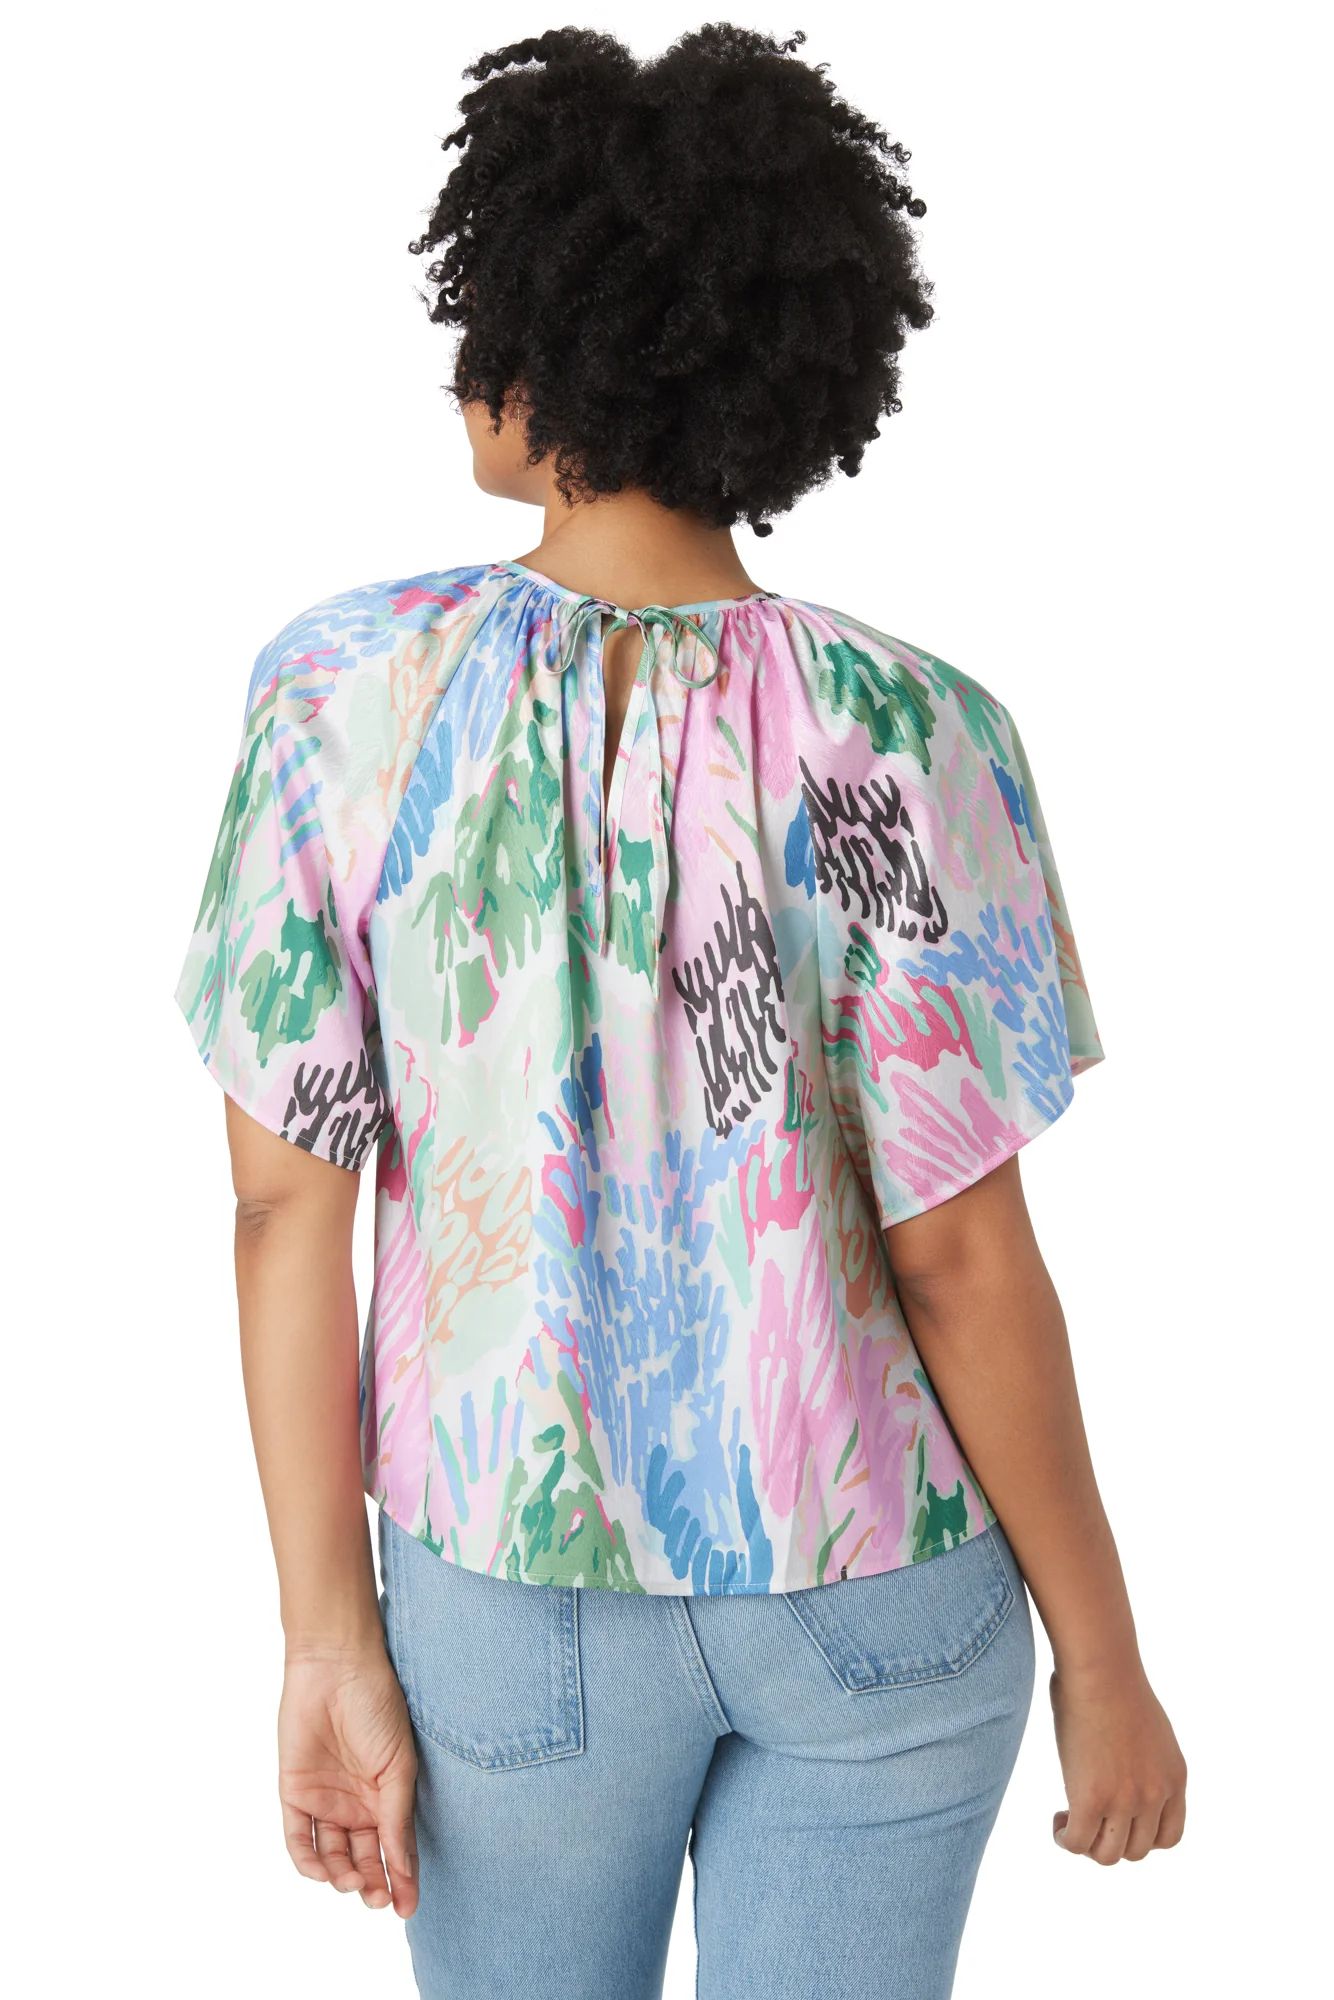 Brynn Top in Painted Garden | CROSBY by Mollie Burch | CROSBY by Mollie Burch